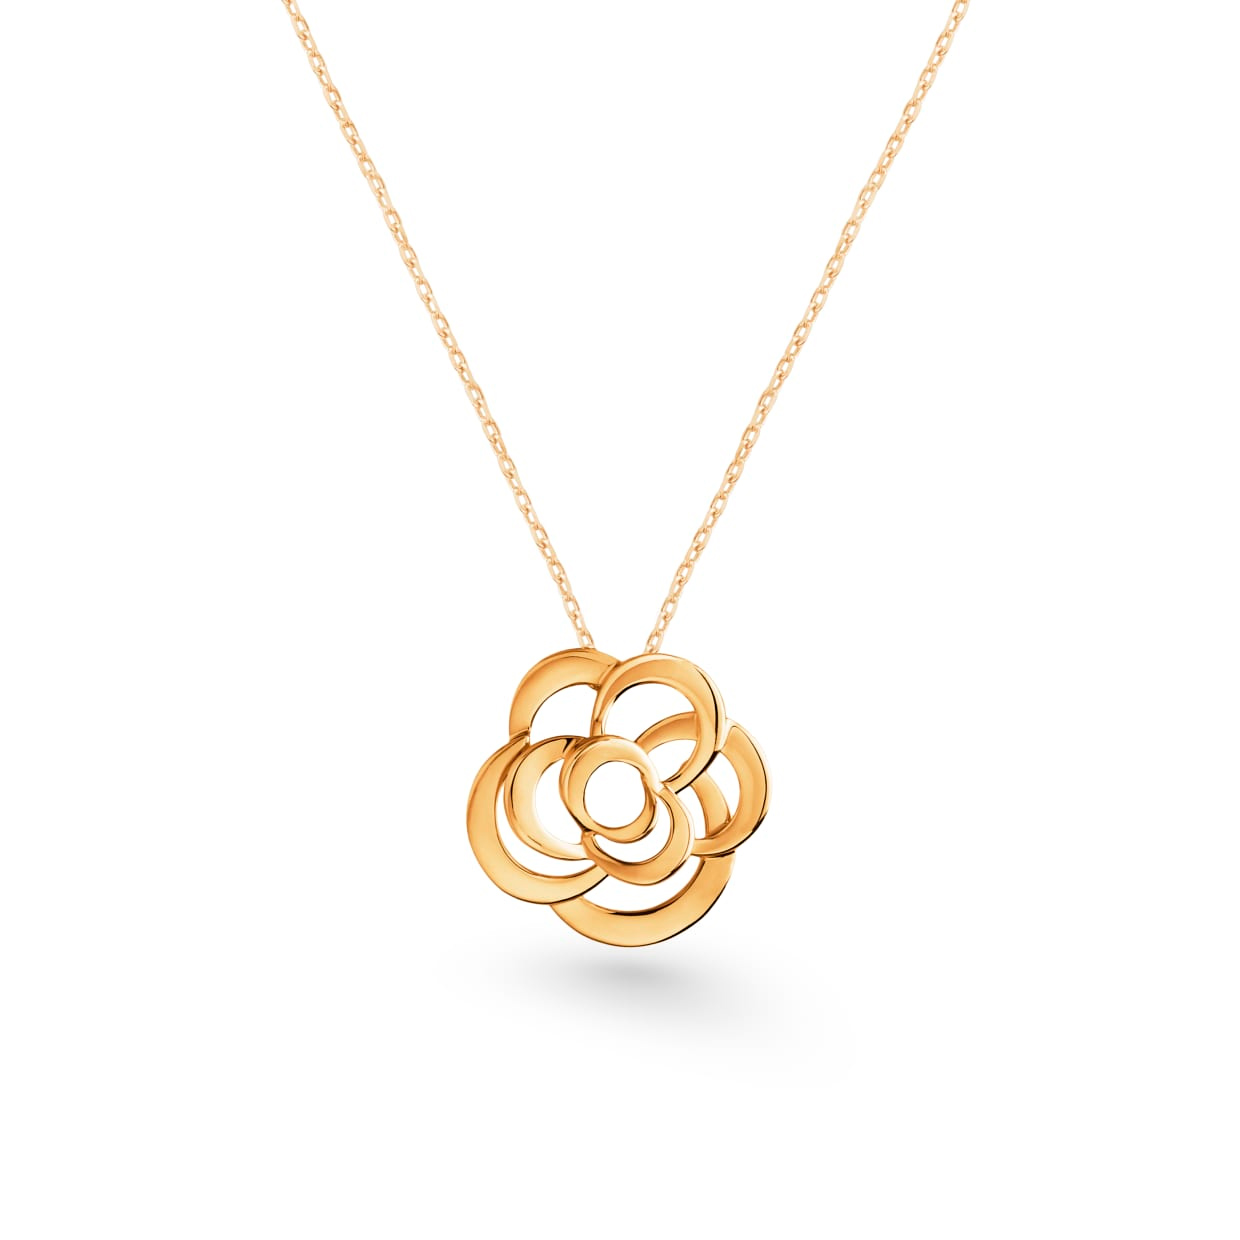 Wholesale OEM necklace OEM/ODM Jewelry in 18K yellow gold plated on sterling silver